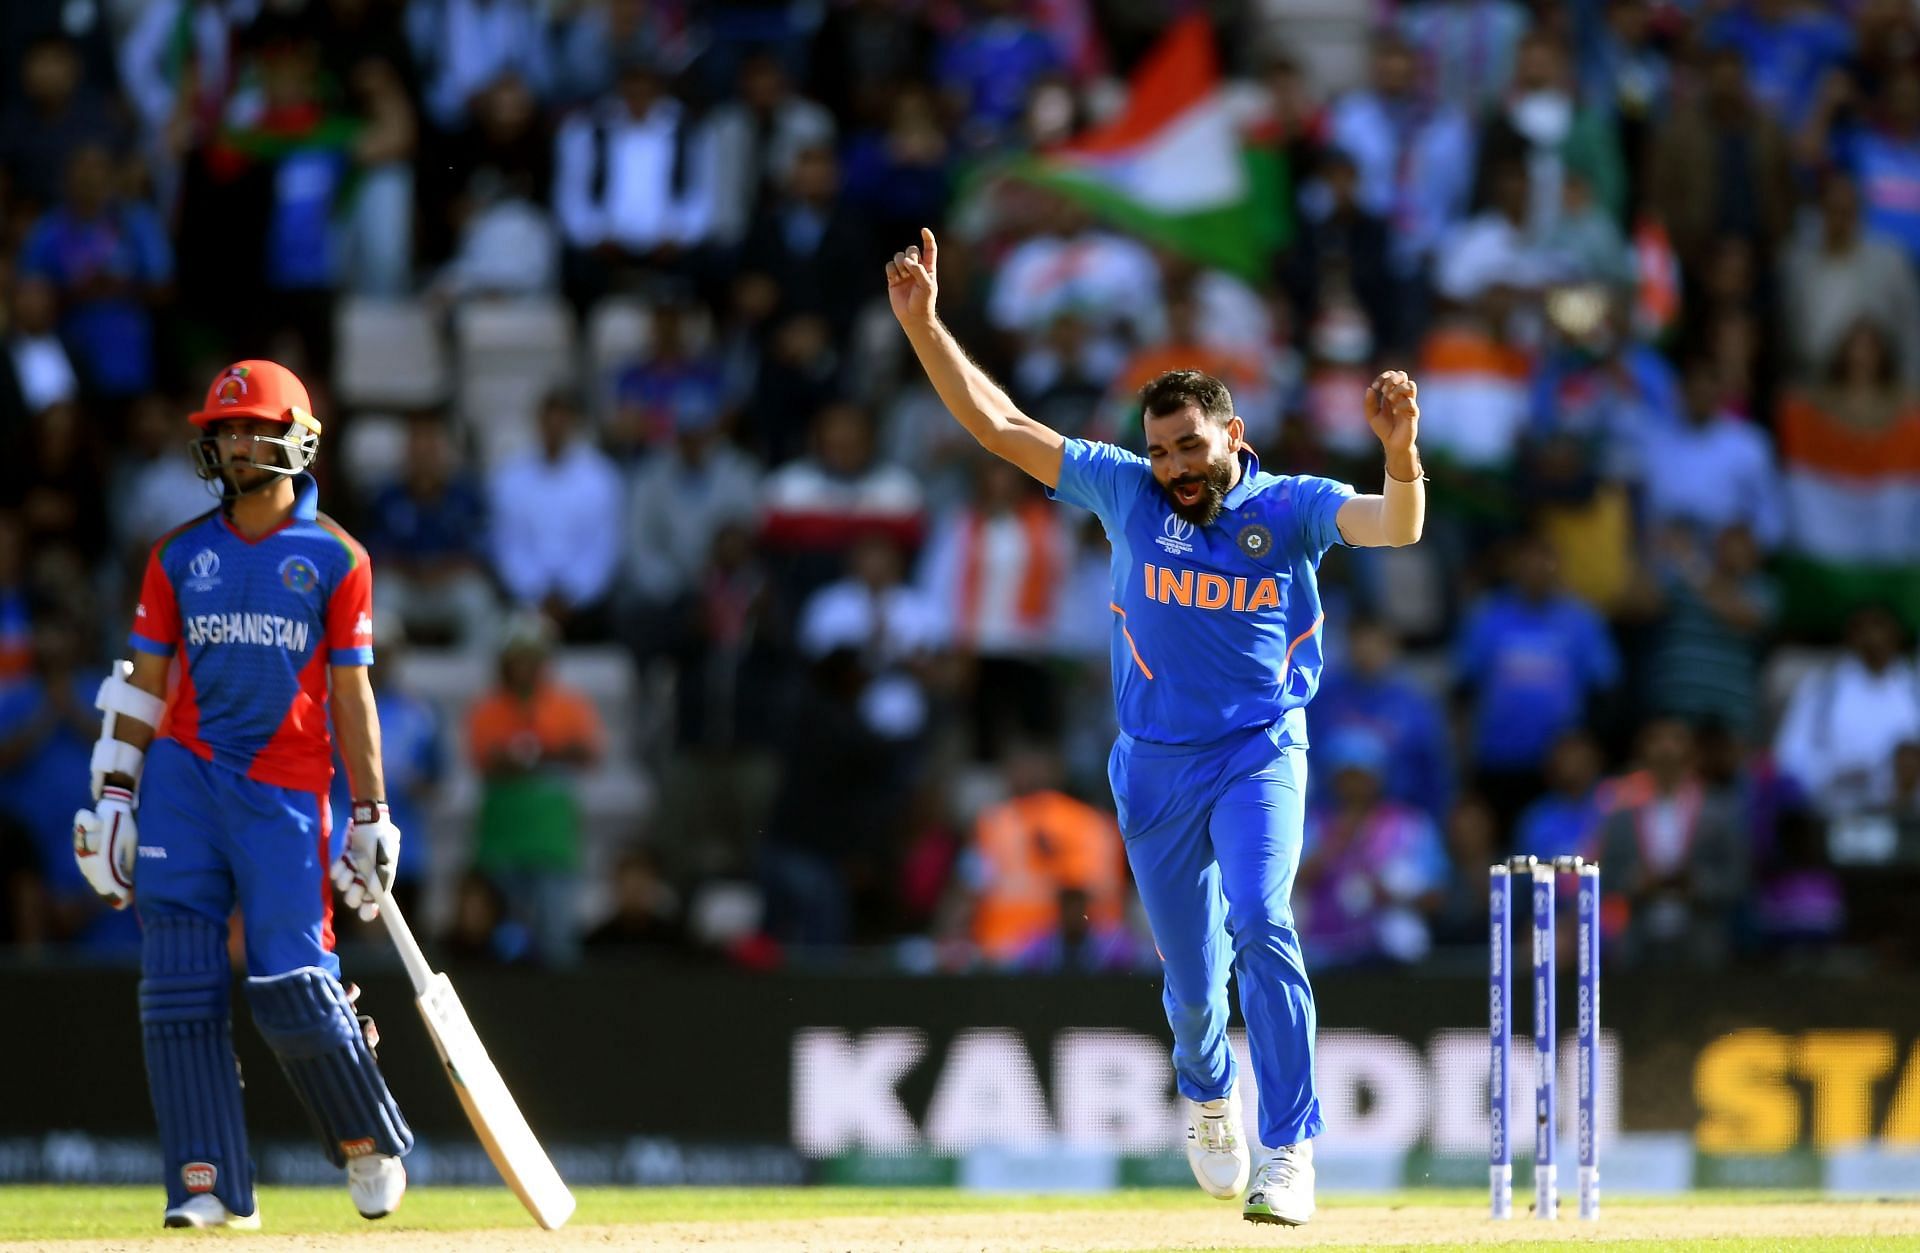 Mohammed Shami took 14 wickets in four matches in the 2019 World Cup, including a hat-trick.